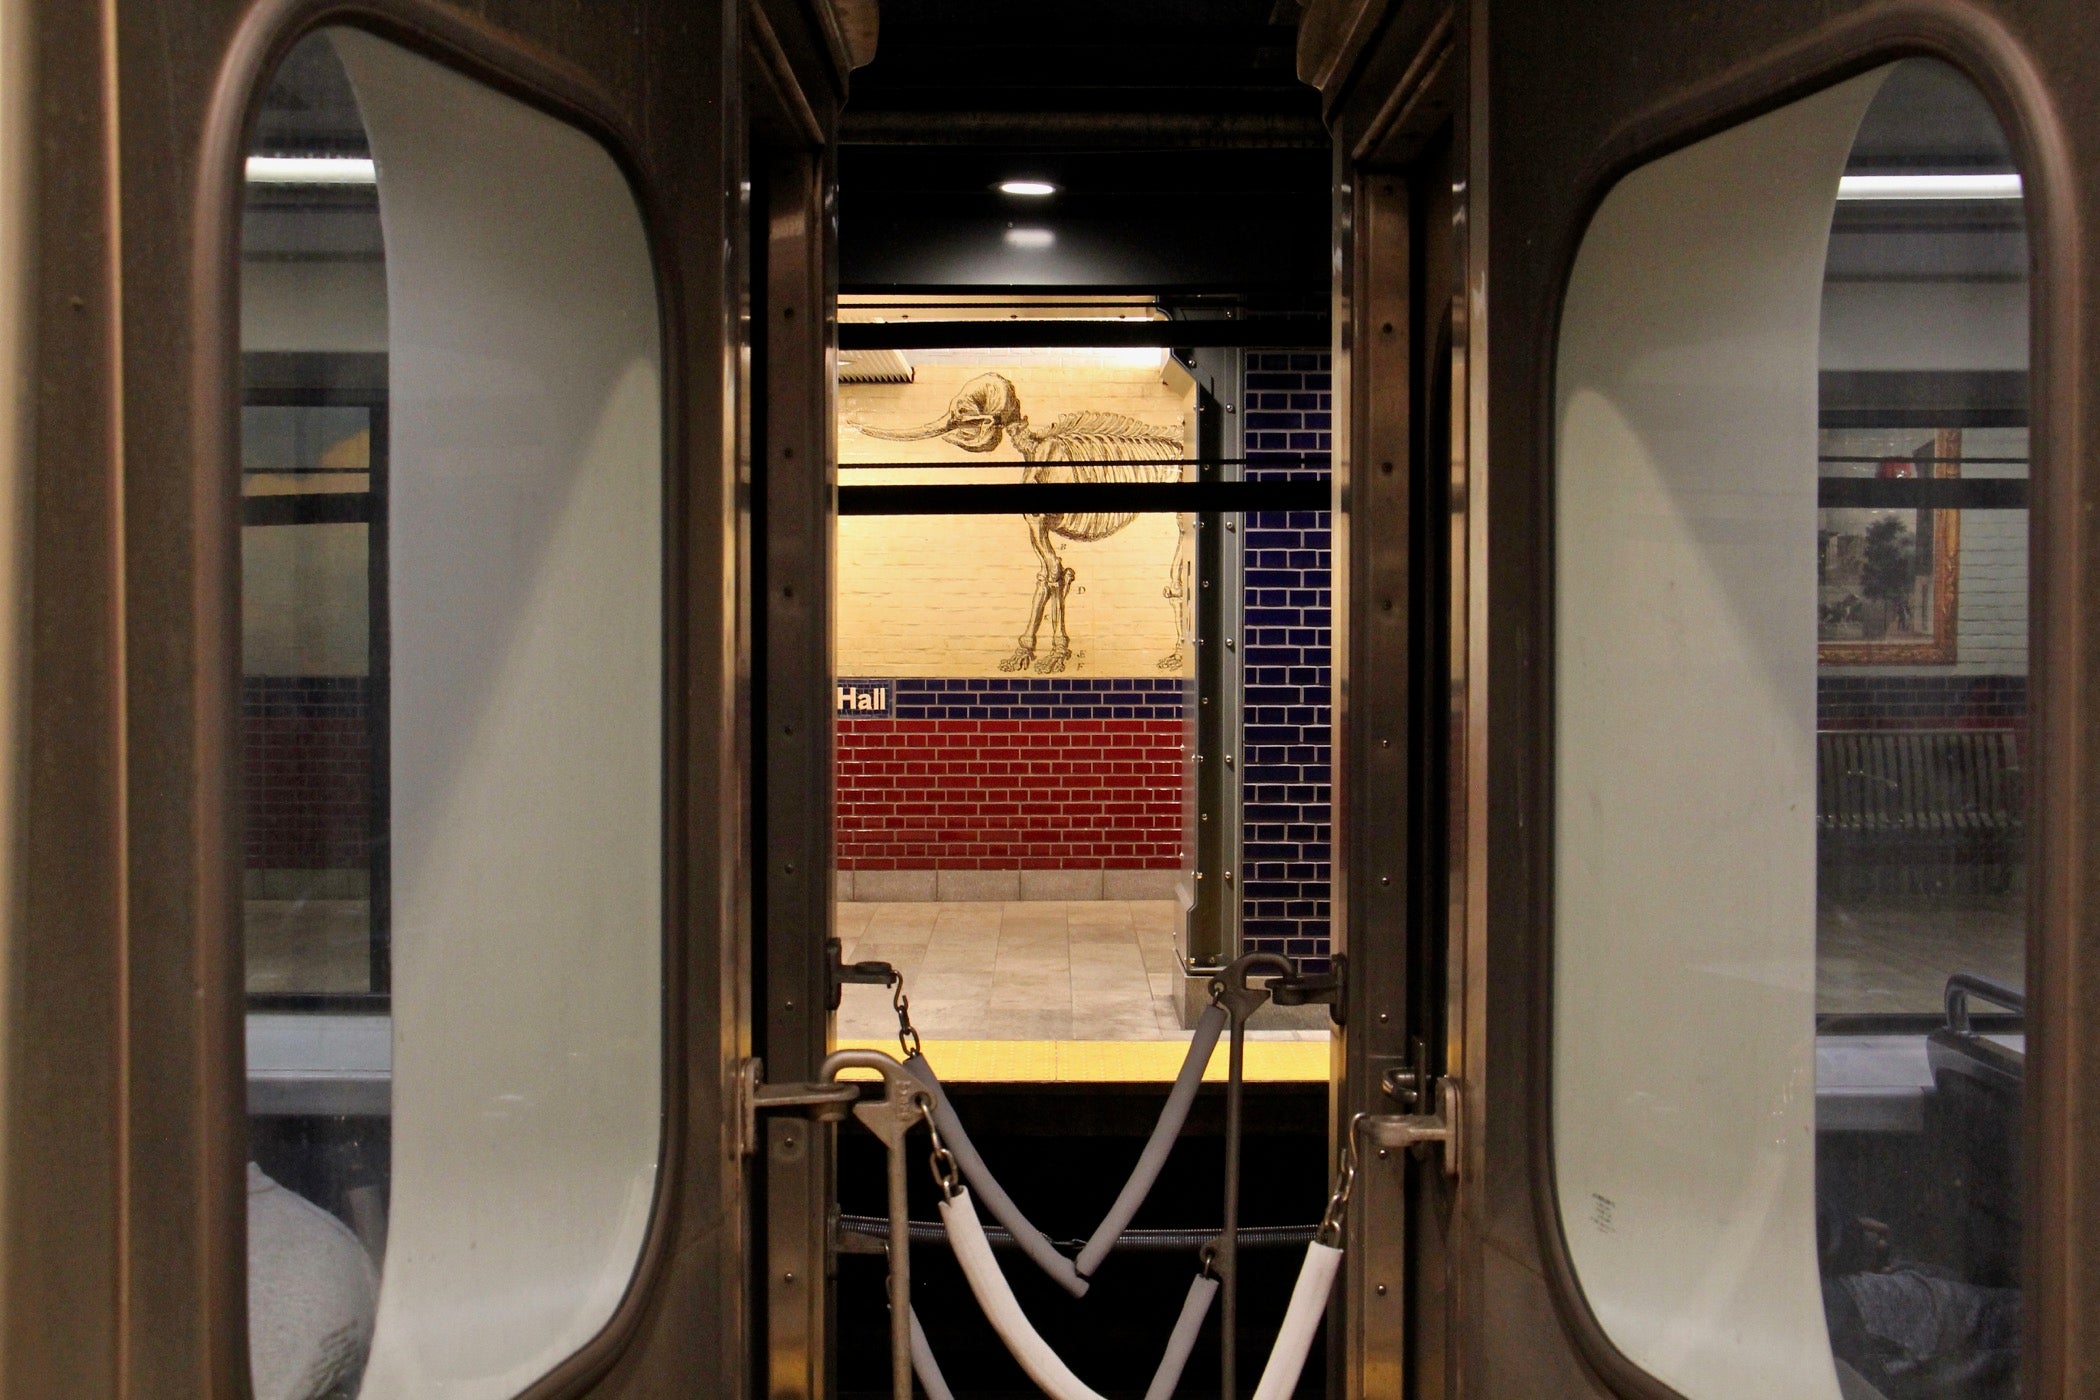 Rembrandt Peale's 1801 drawing of a mastadon skeleton is visible between cars at the Independence Hall SEPTA Station. (Emma Lee/WHYY)